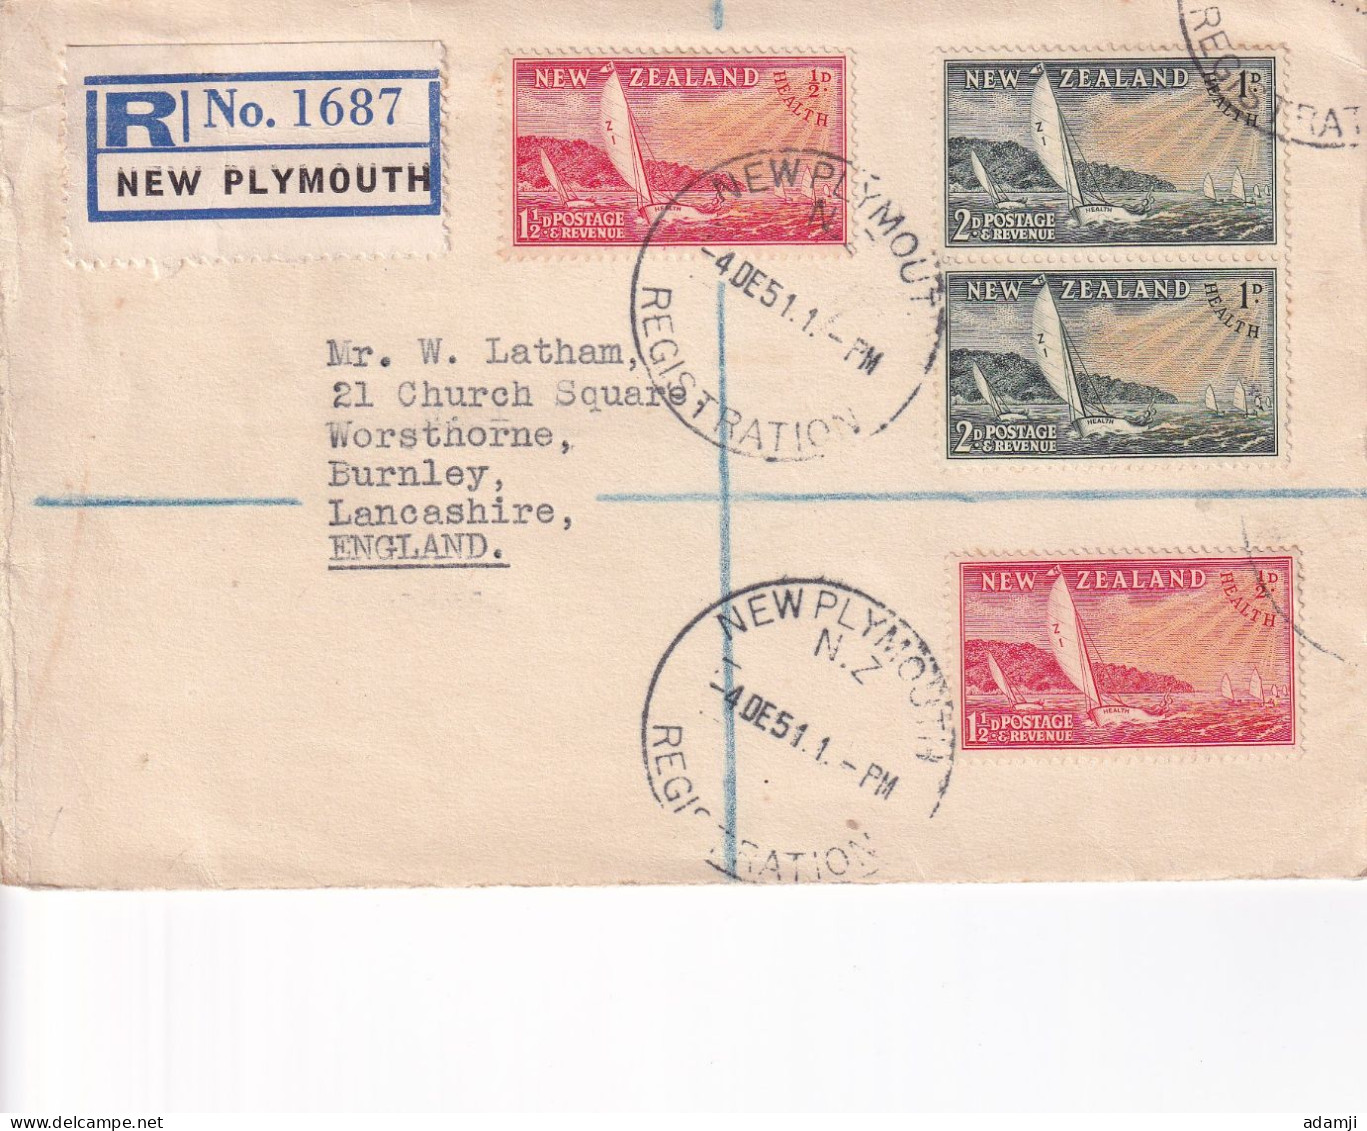 NEW ZEALAND 1951 HEALTH SET REGD SET FDC COVER TO ENGLAND. - Covers & Documents